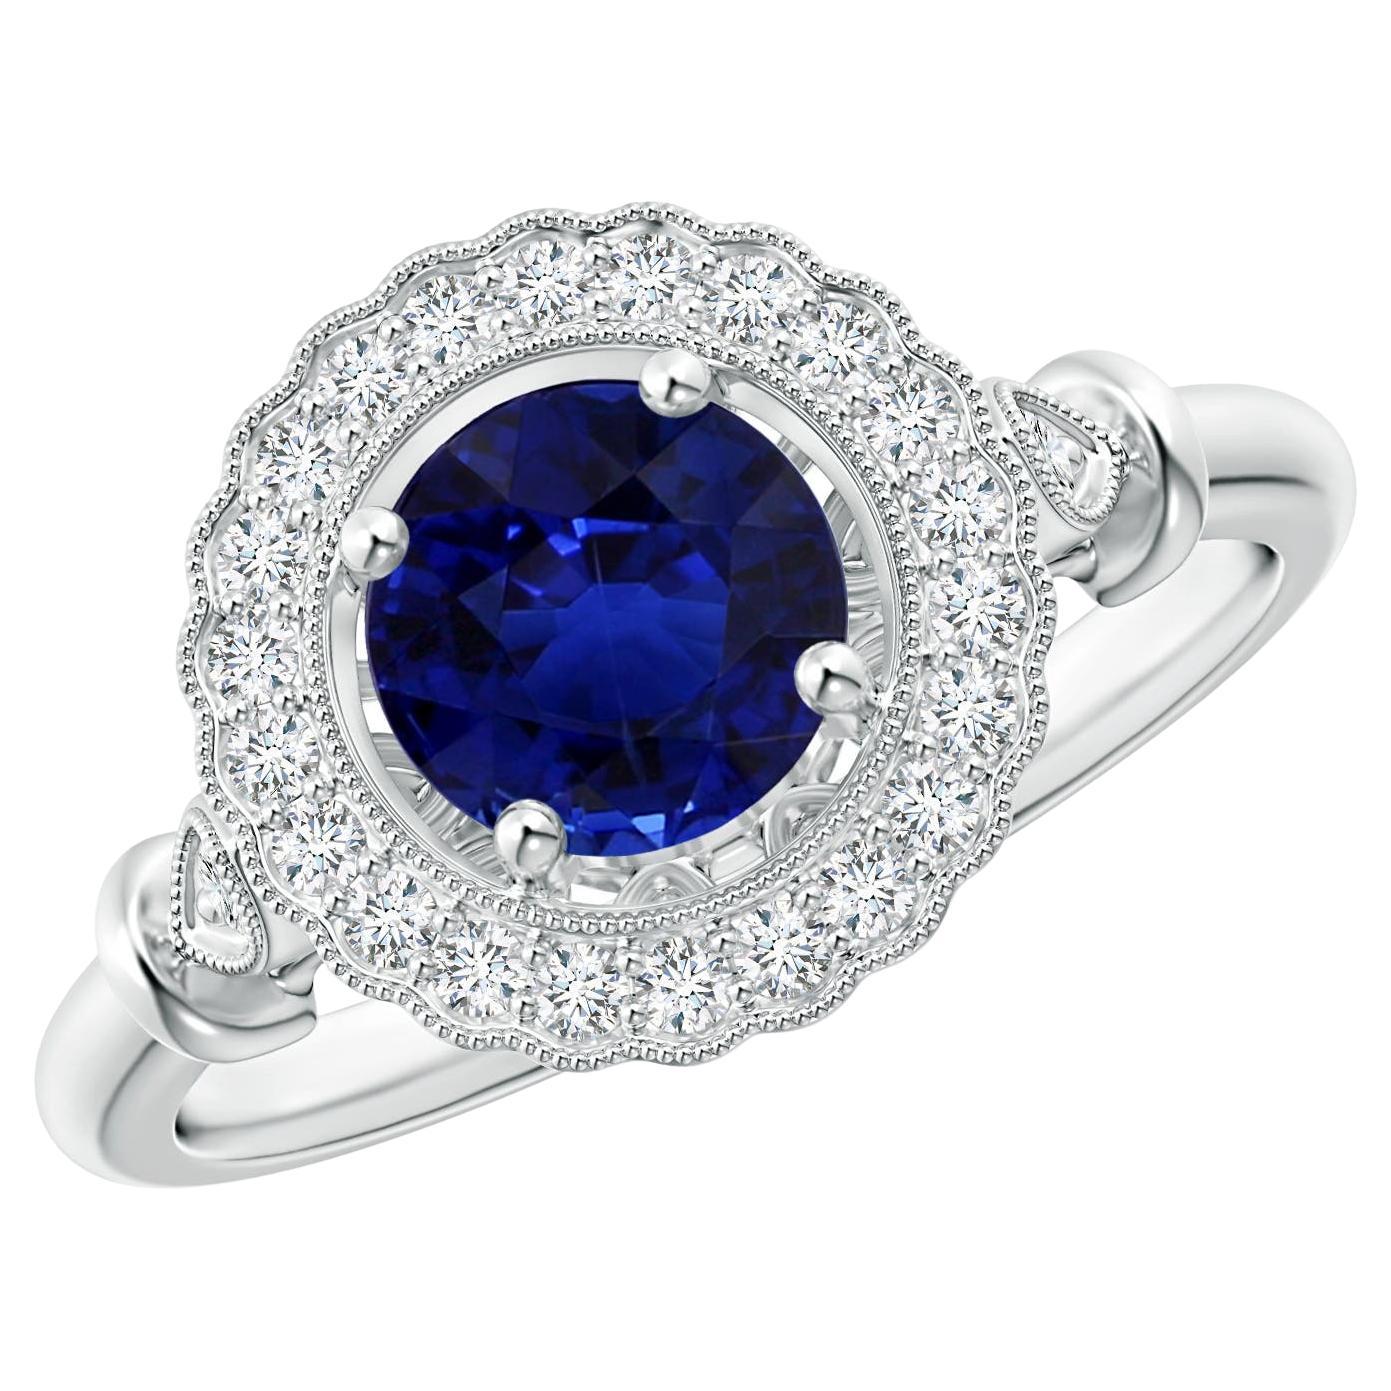 For Sale:  GIA Certified Natural Sapphire Art Deco Inspired Halo Ring in White Gold